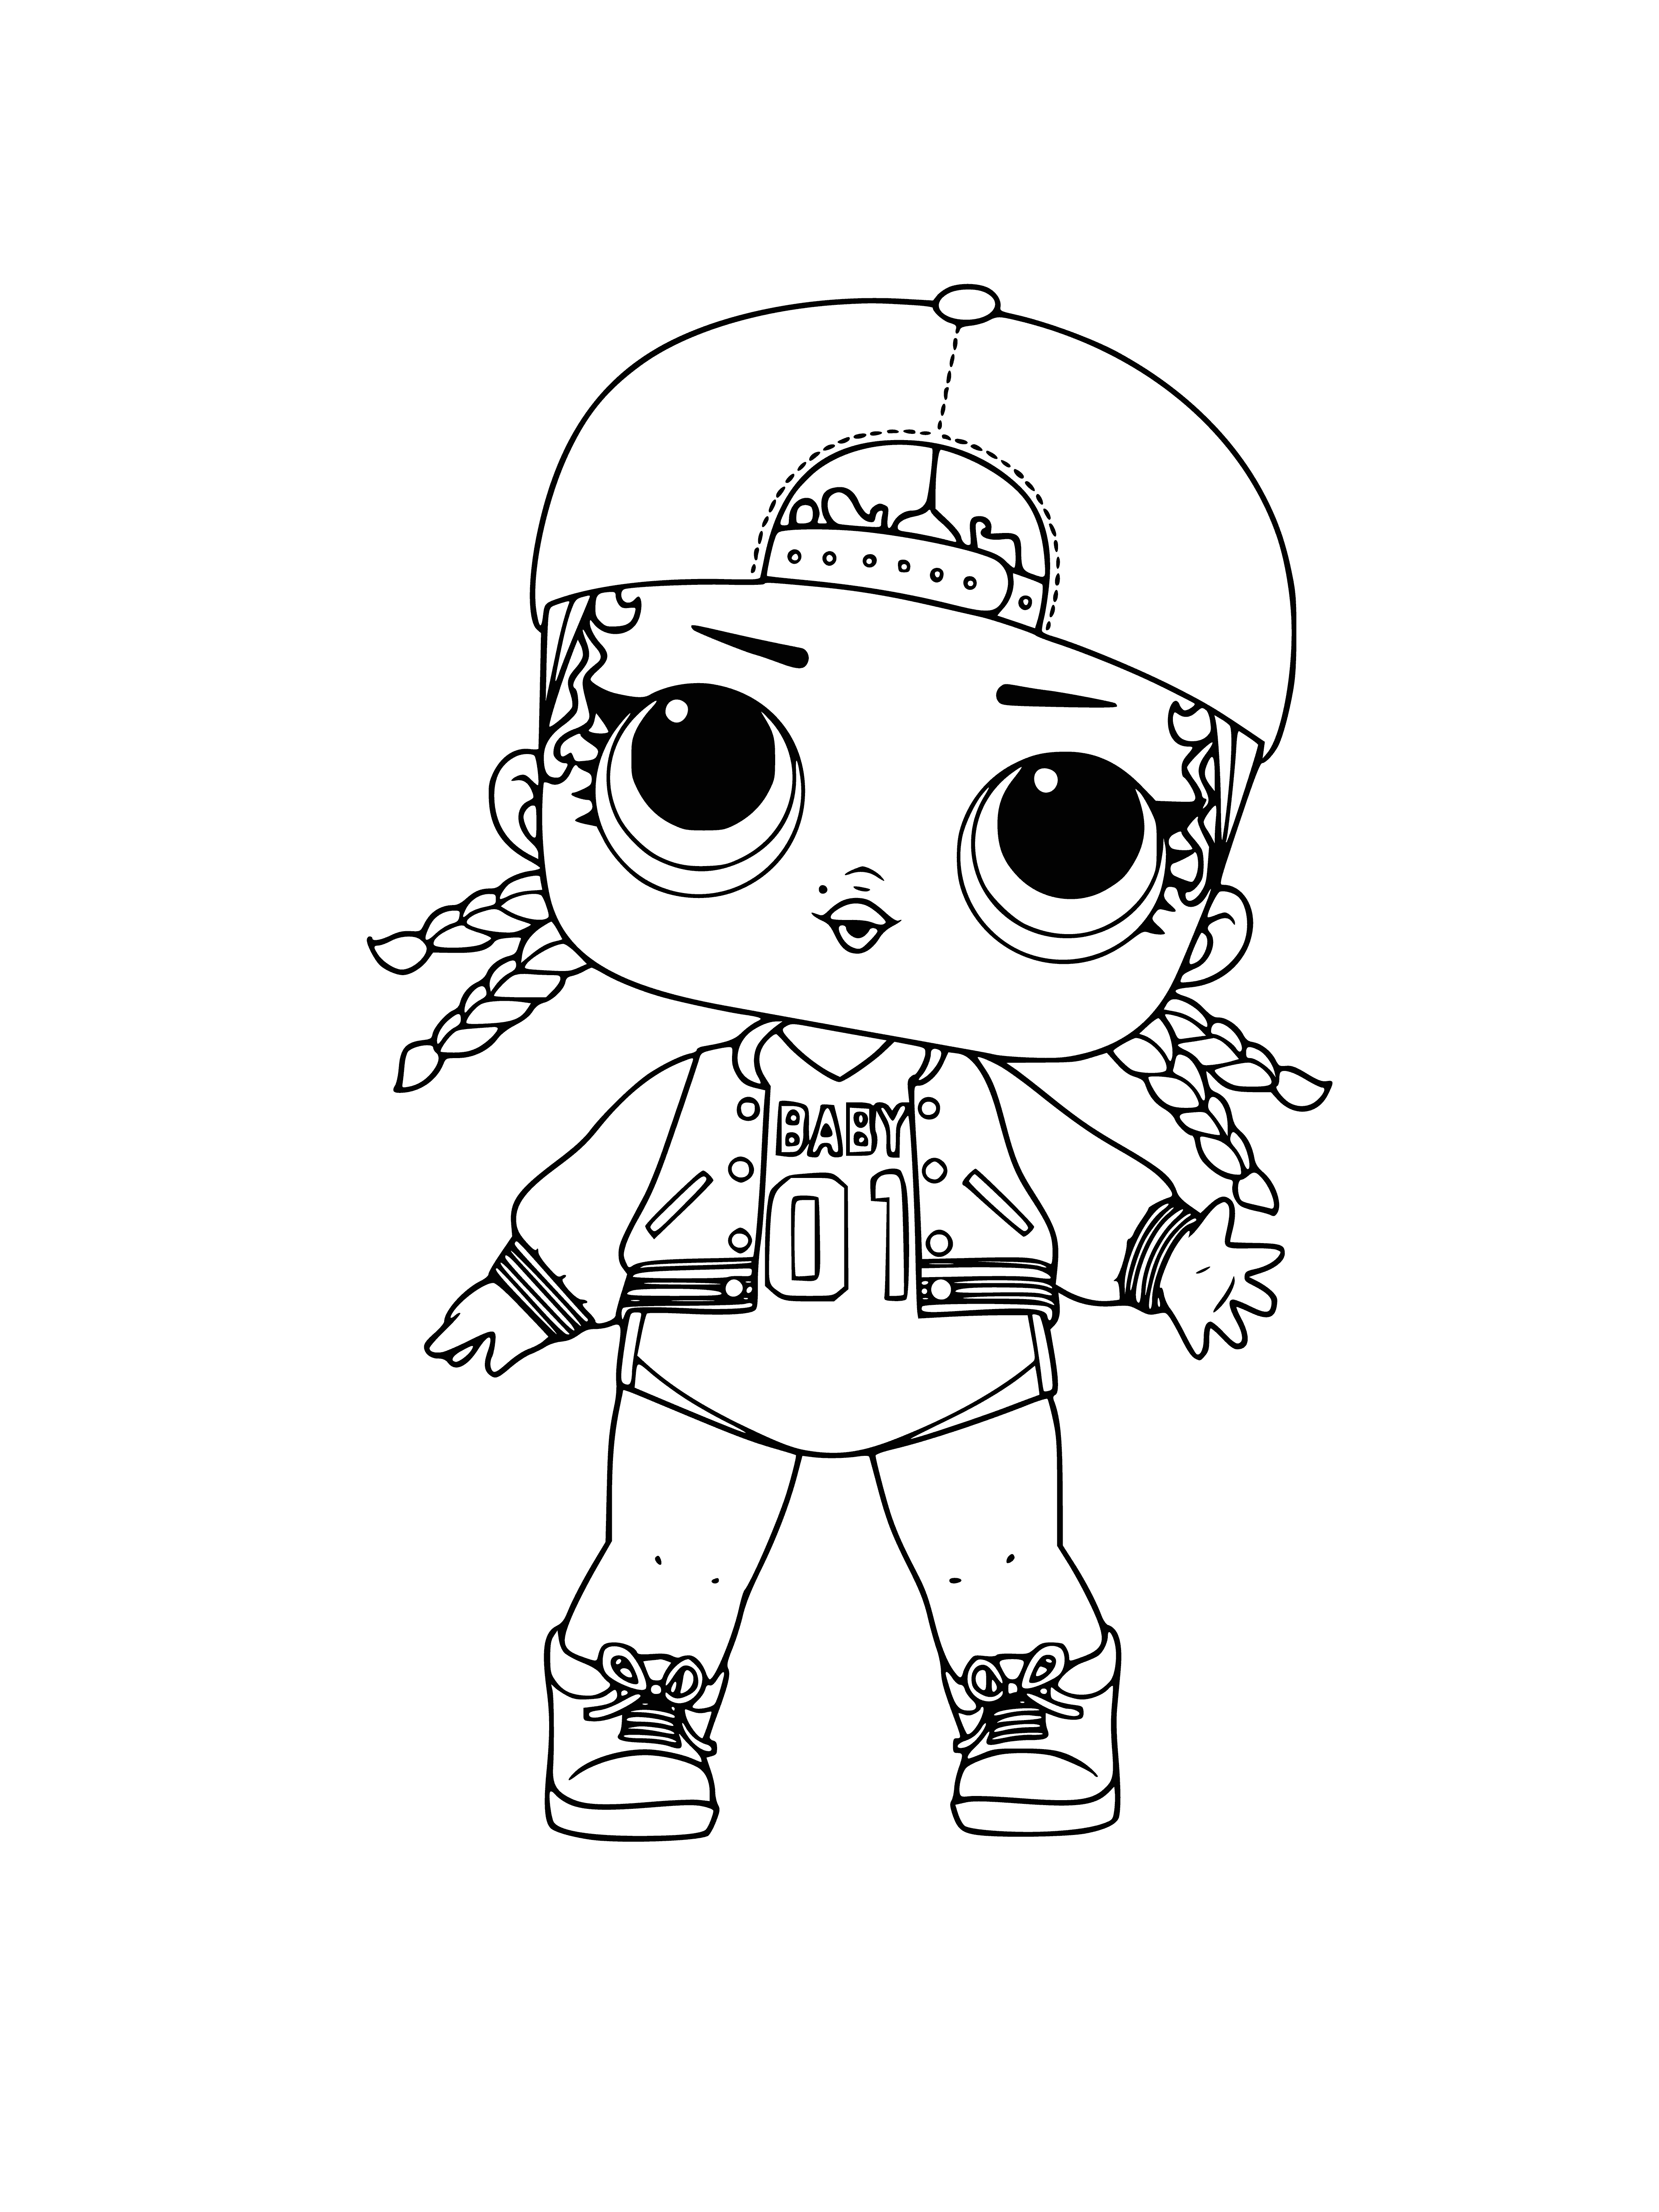 coloring page: A LOL doll, with a blue ball for a head, black plastic legs, top, arms, and skirt, and white plastic hands and buttons. #LOLDoll